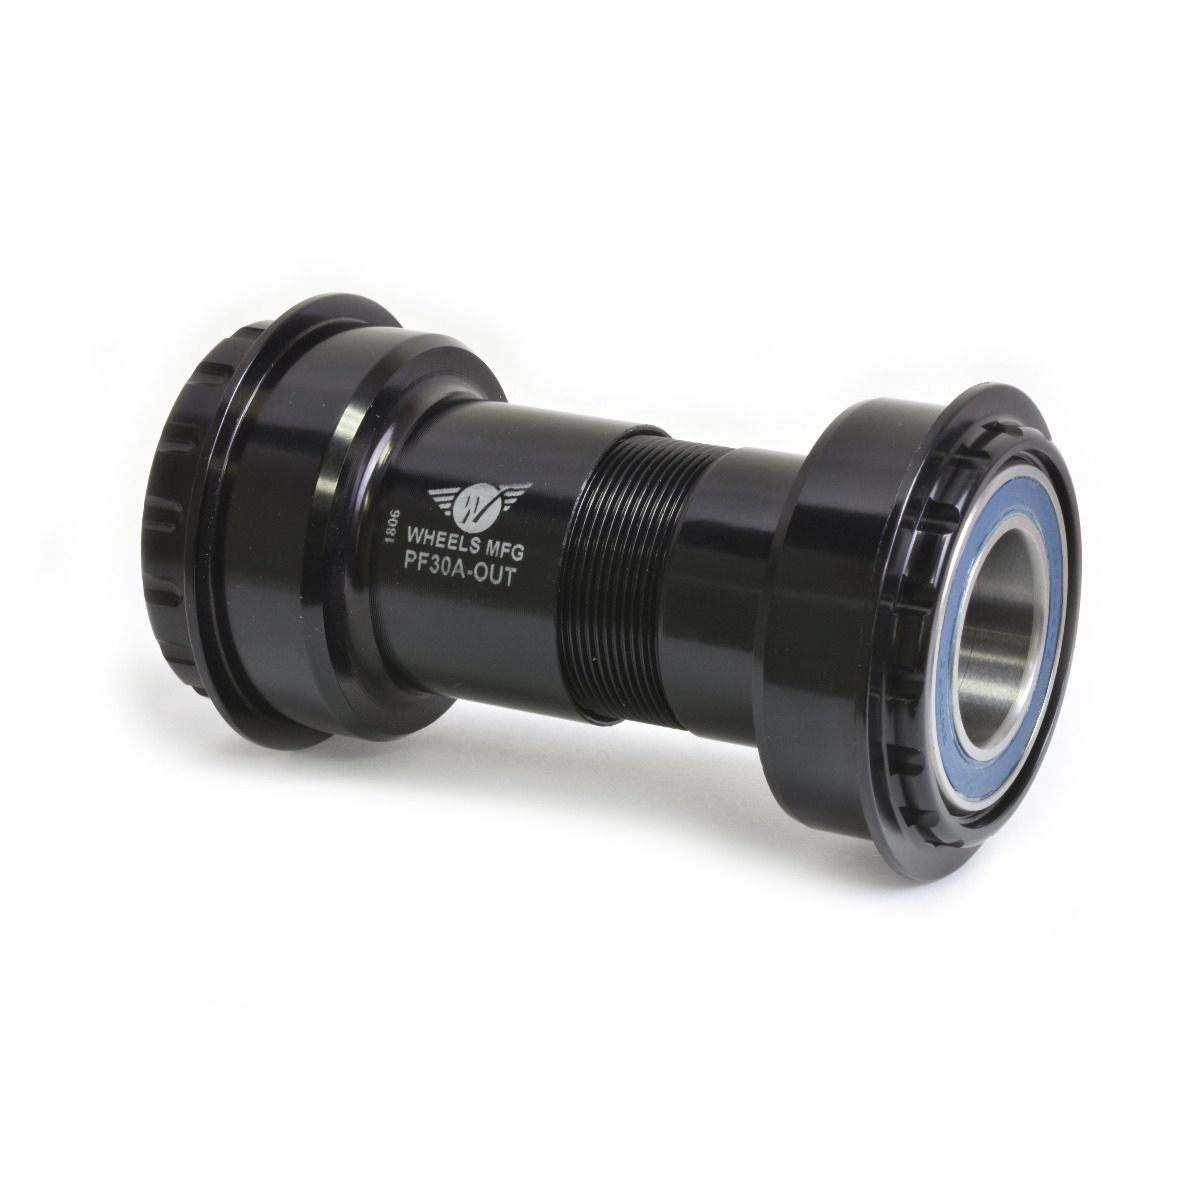 Wheels Manufacturing Inc. PF30A Outboard ABEC-3 Bottom Bracket for 22/24mm SRAM Spindles